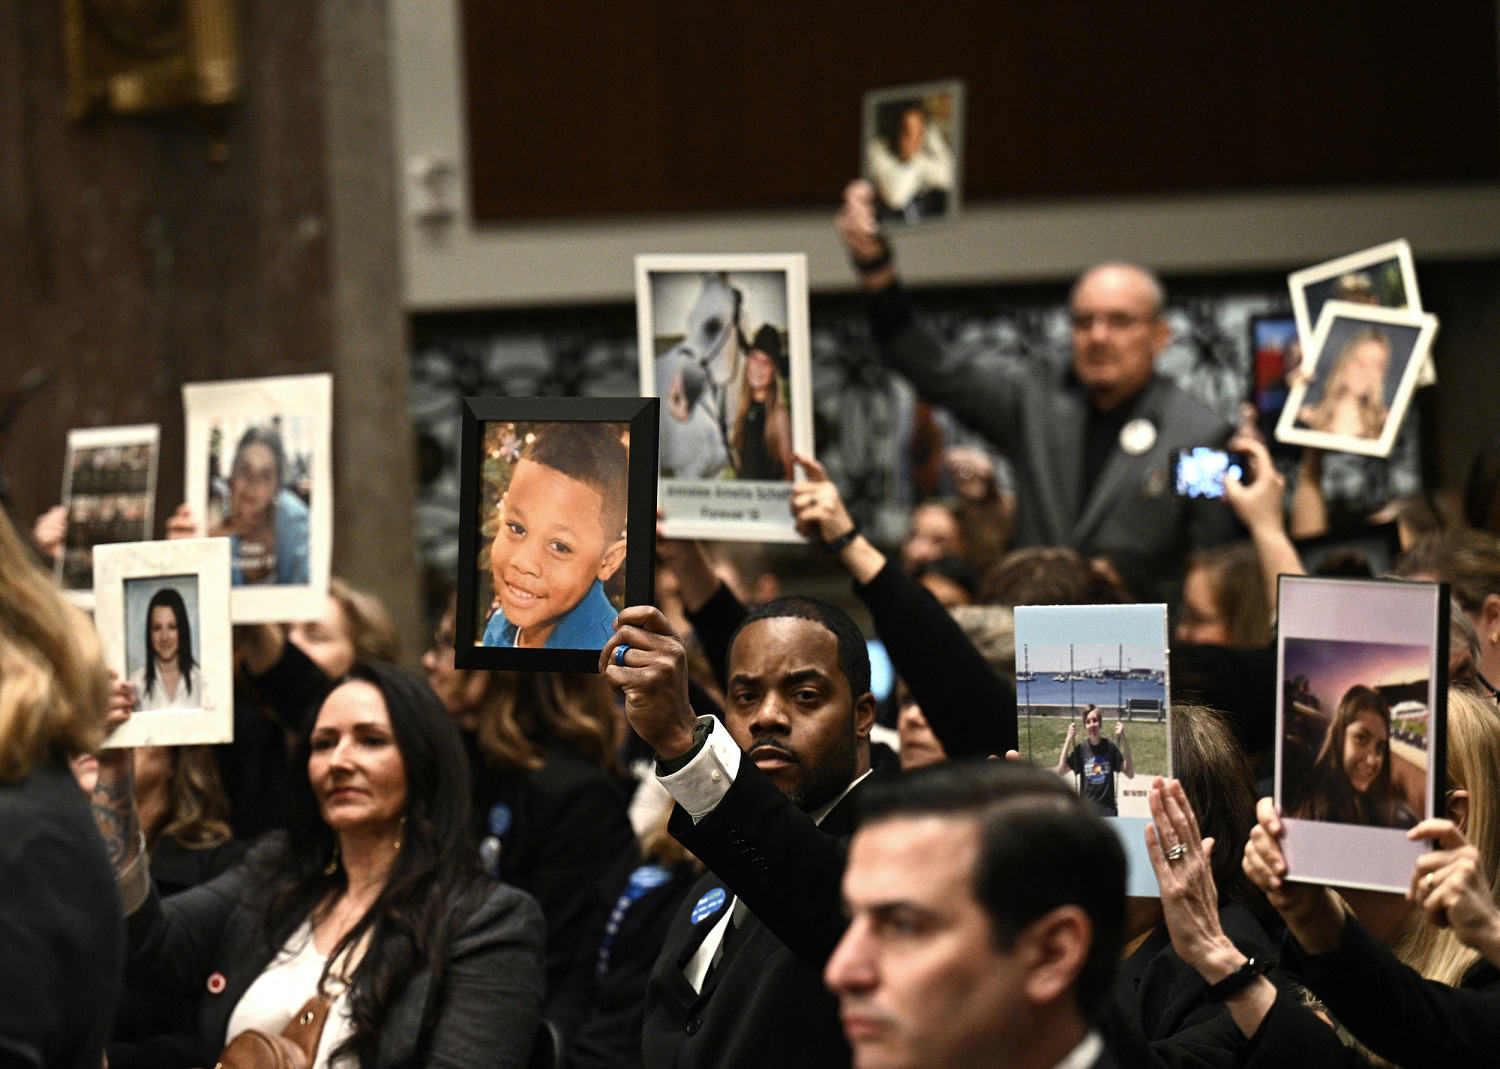 Holding photos of their deceased children, parents lobby Congress to pass online safety legislation